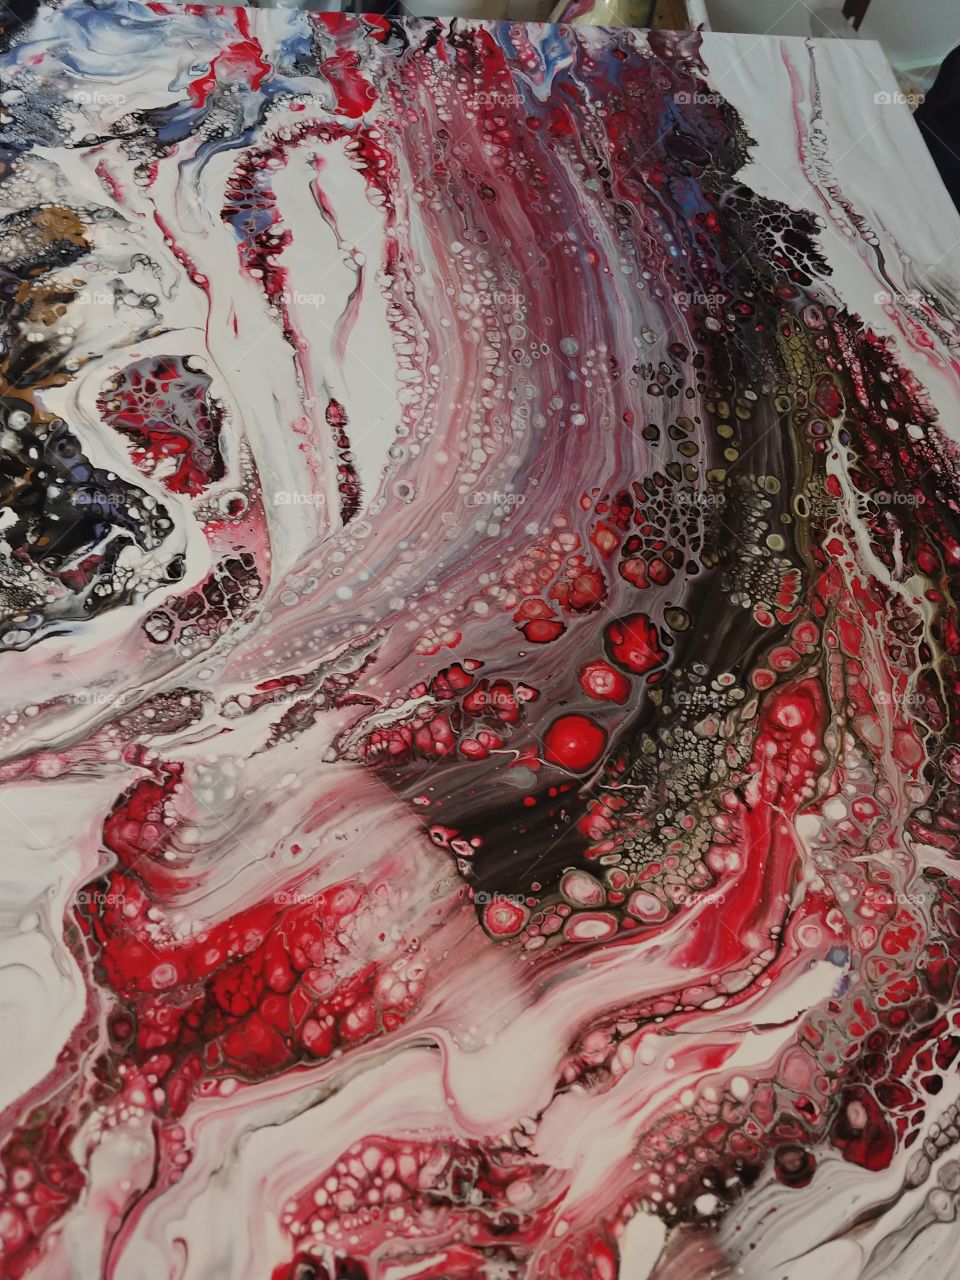 red sea wave art desgin or home decor. abstract artwork painting.